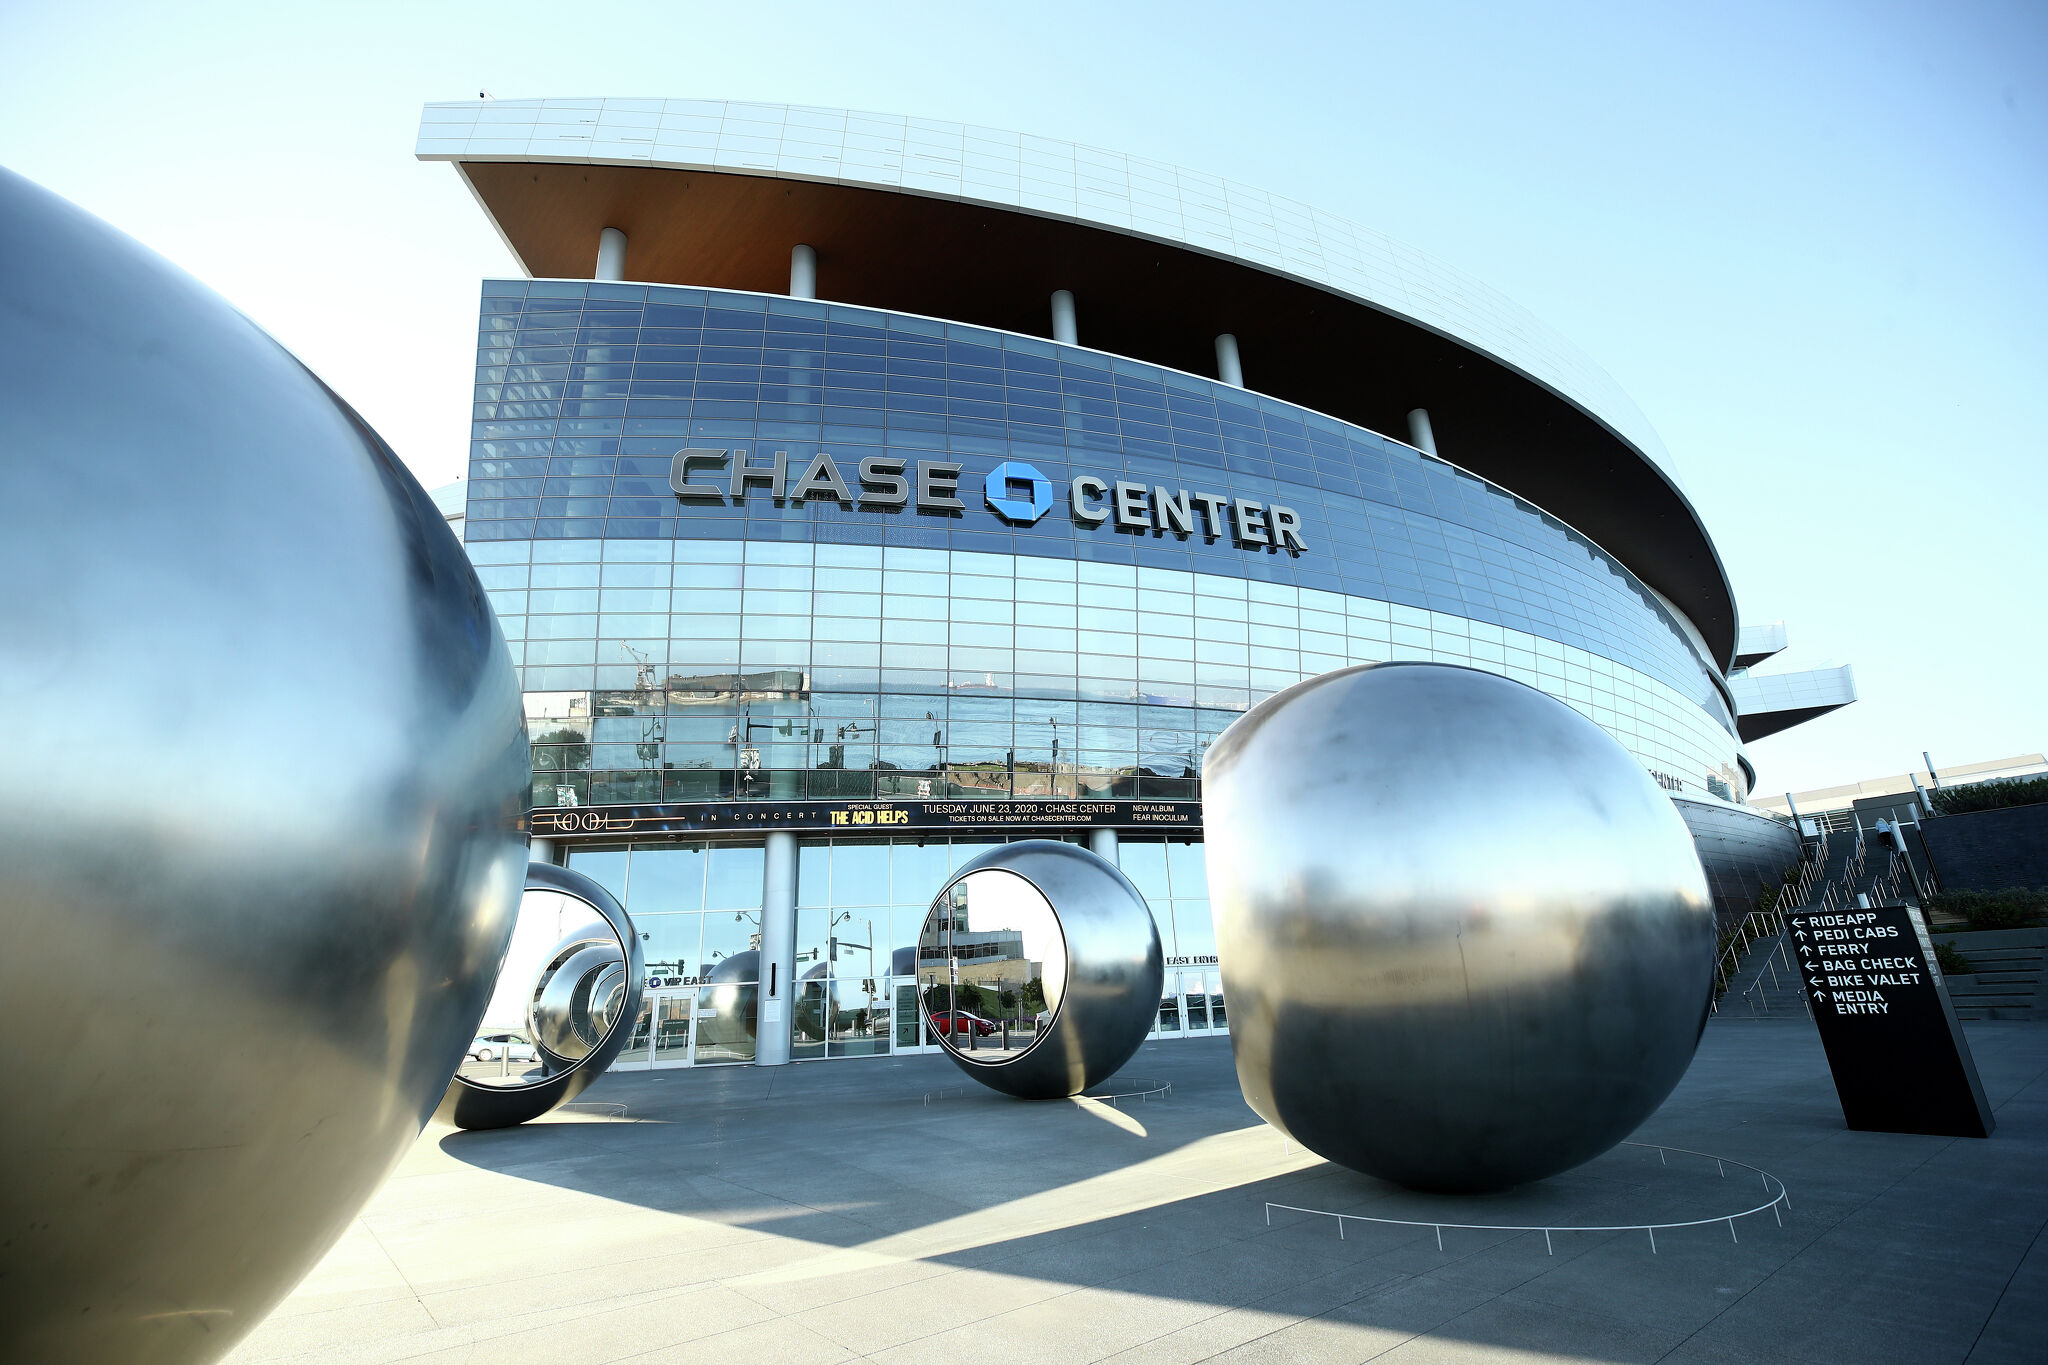 The Warriors are reportedly hosting the 2025 NBA All-Star Game at Chase Center